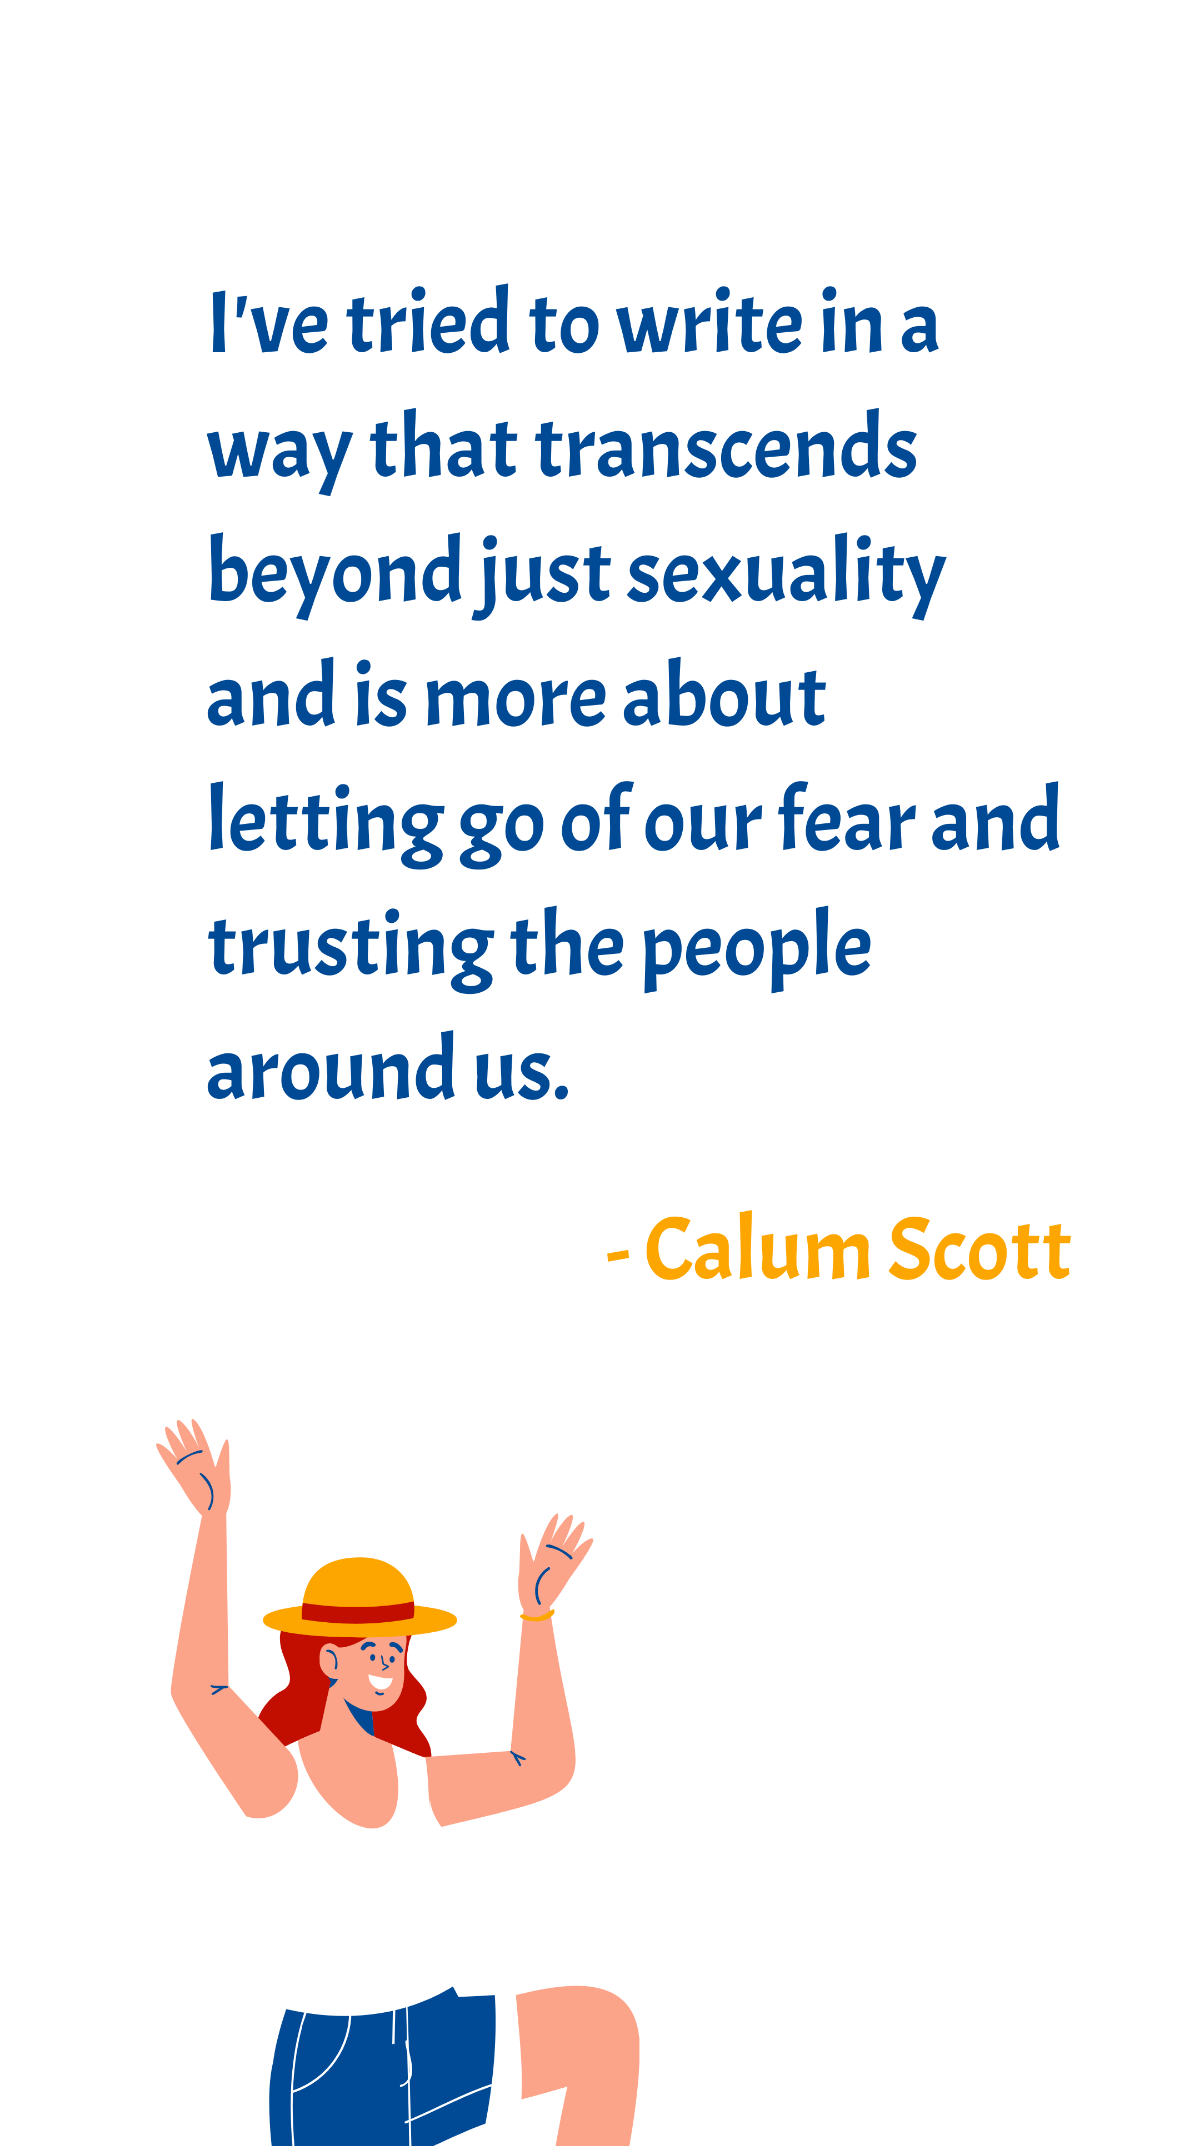 Calum Scott - I've tried to write in a way that transcends beyond just sexuality and is more about letting go of our fear and trusting the people around us.